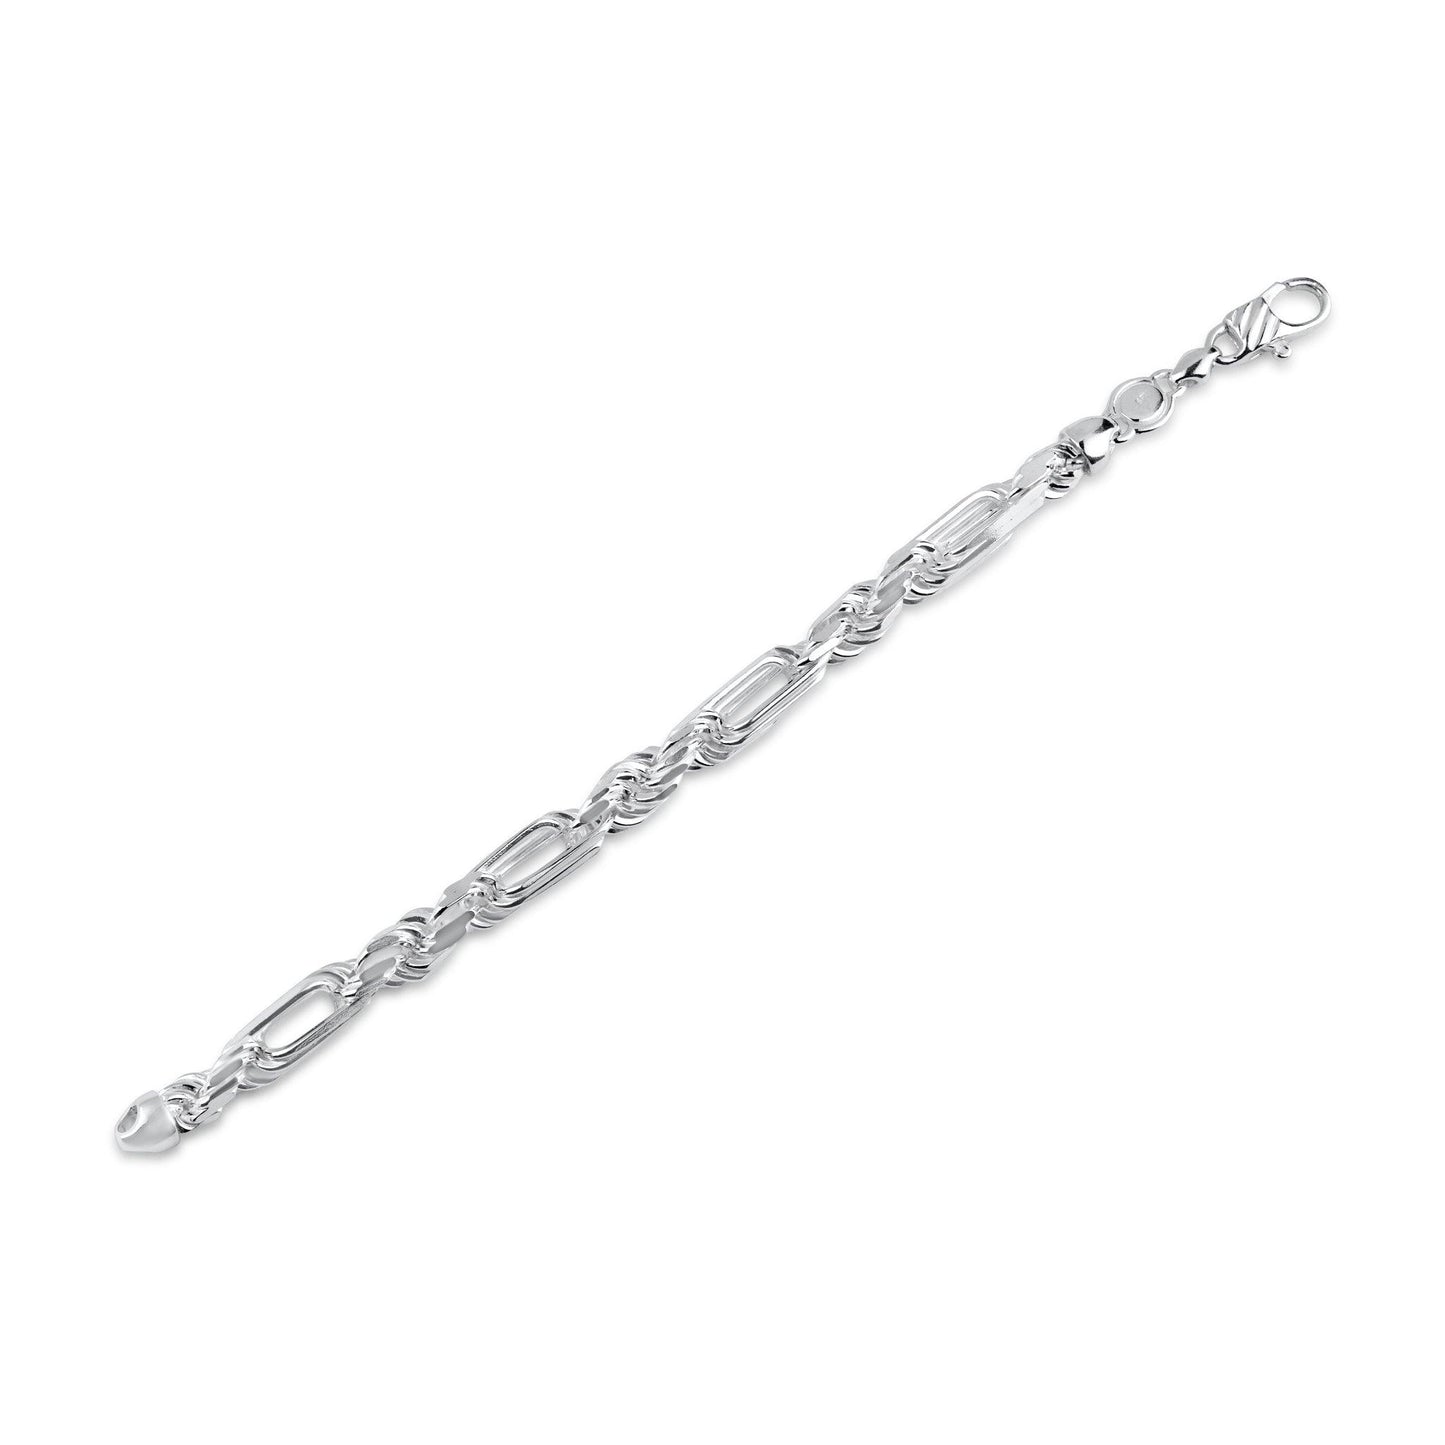 Figarope Milano Chain or Bracelet 8mm - CH544